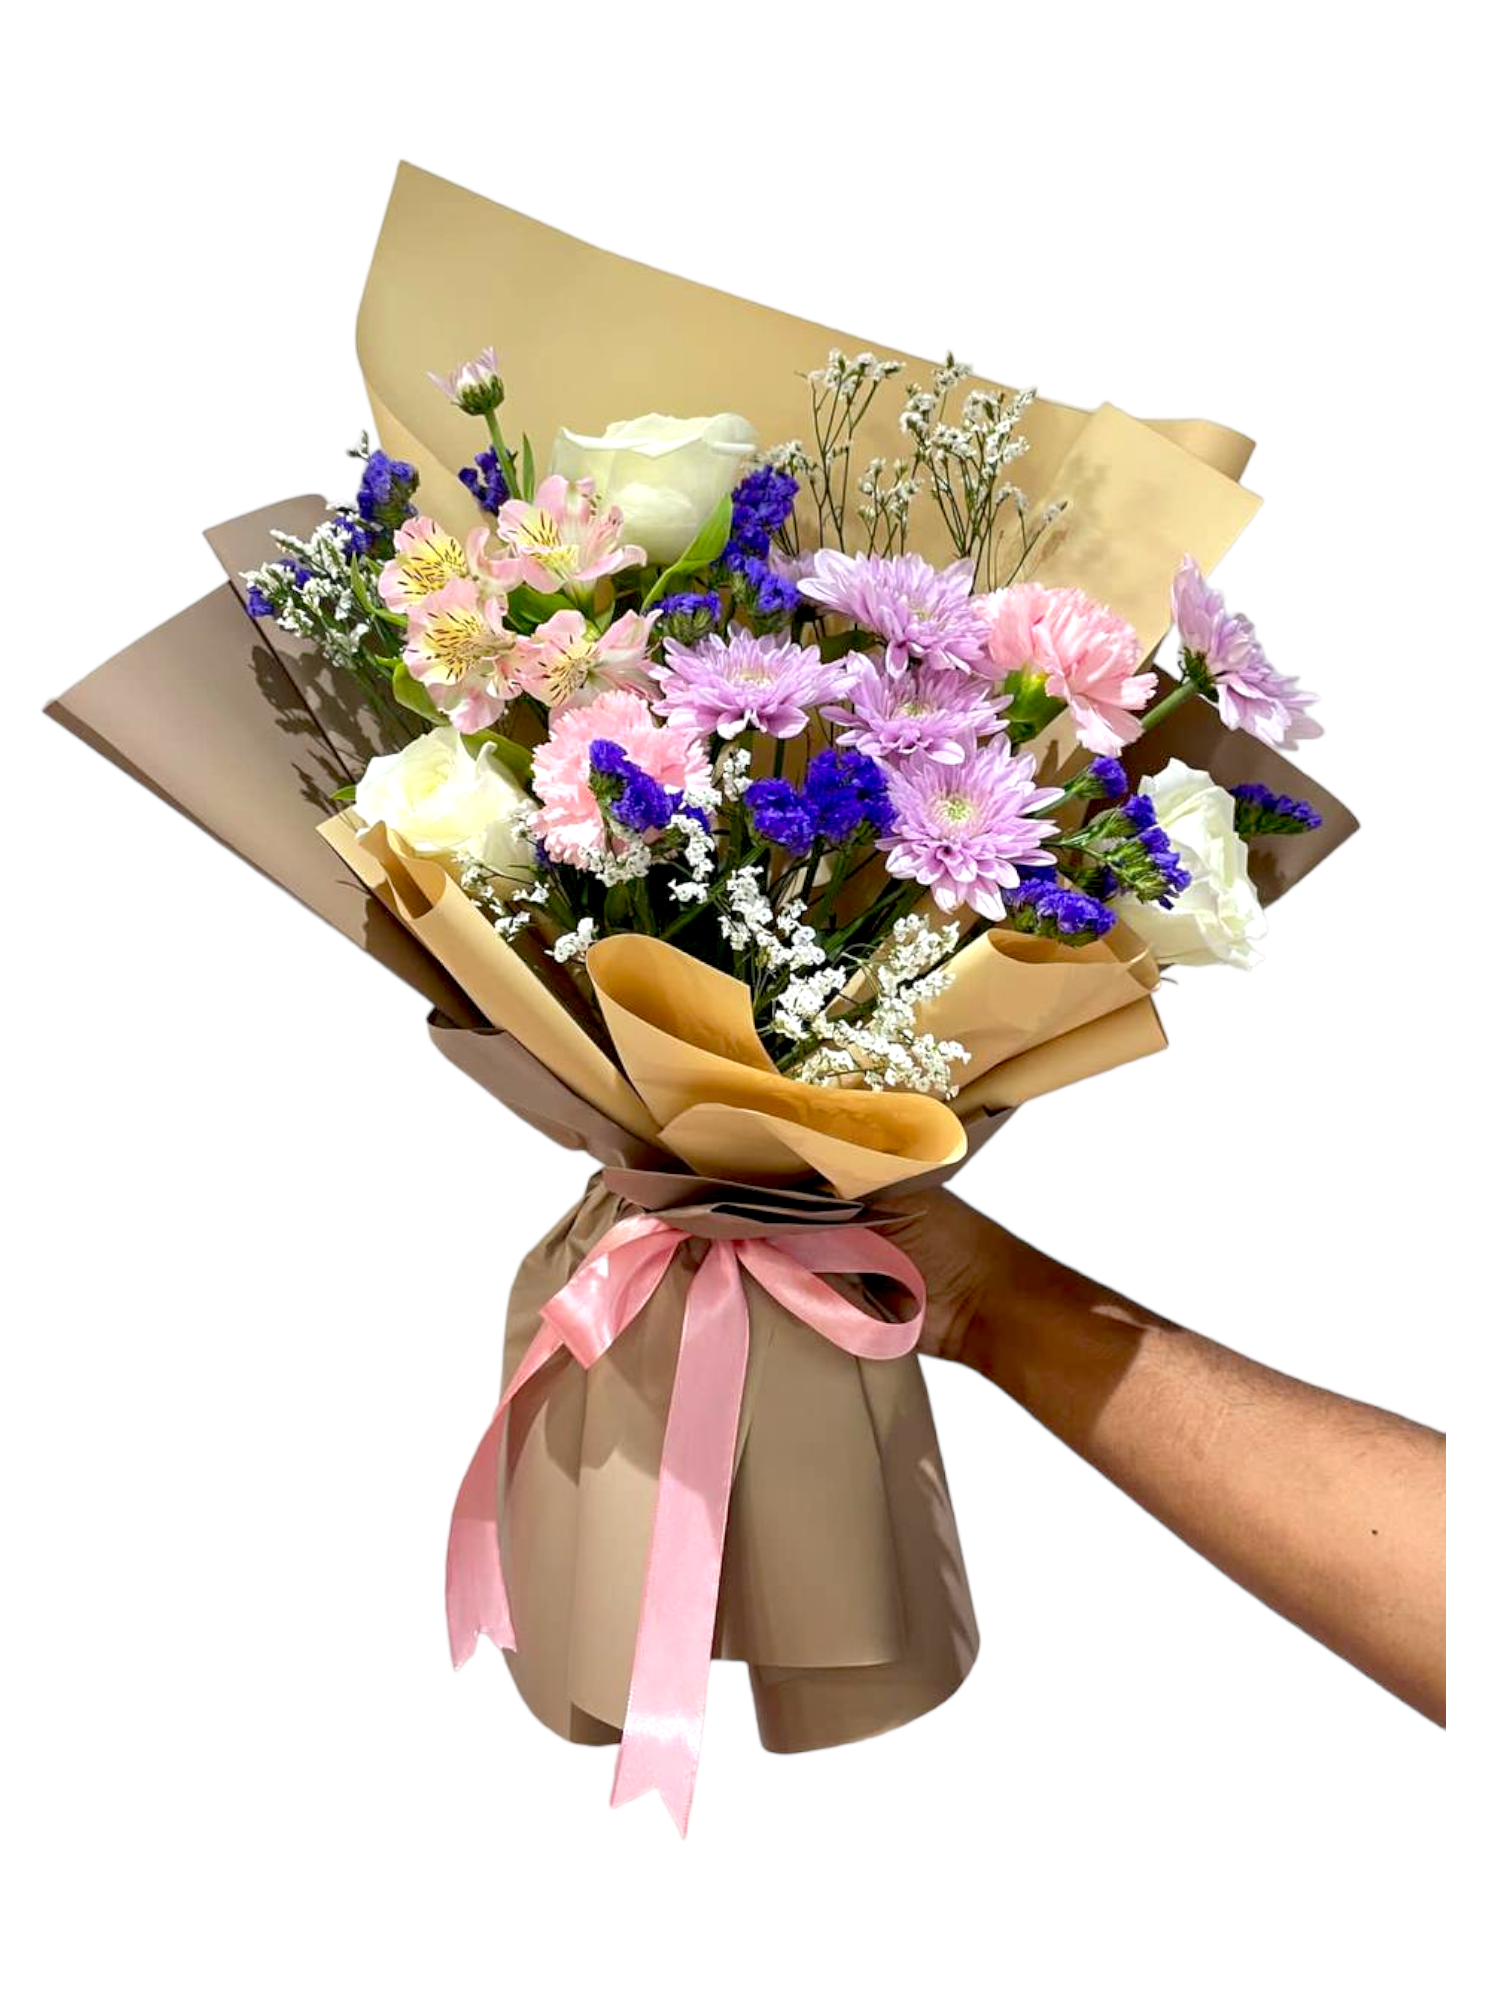 Beauty Refined hand bouquet delivery in Dubai 